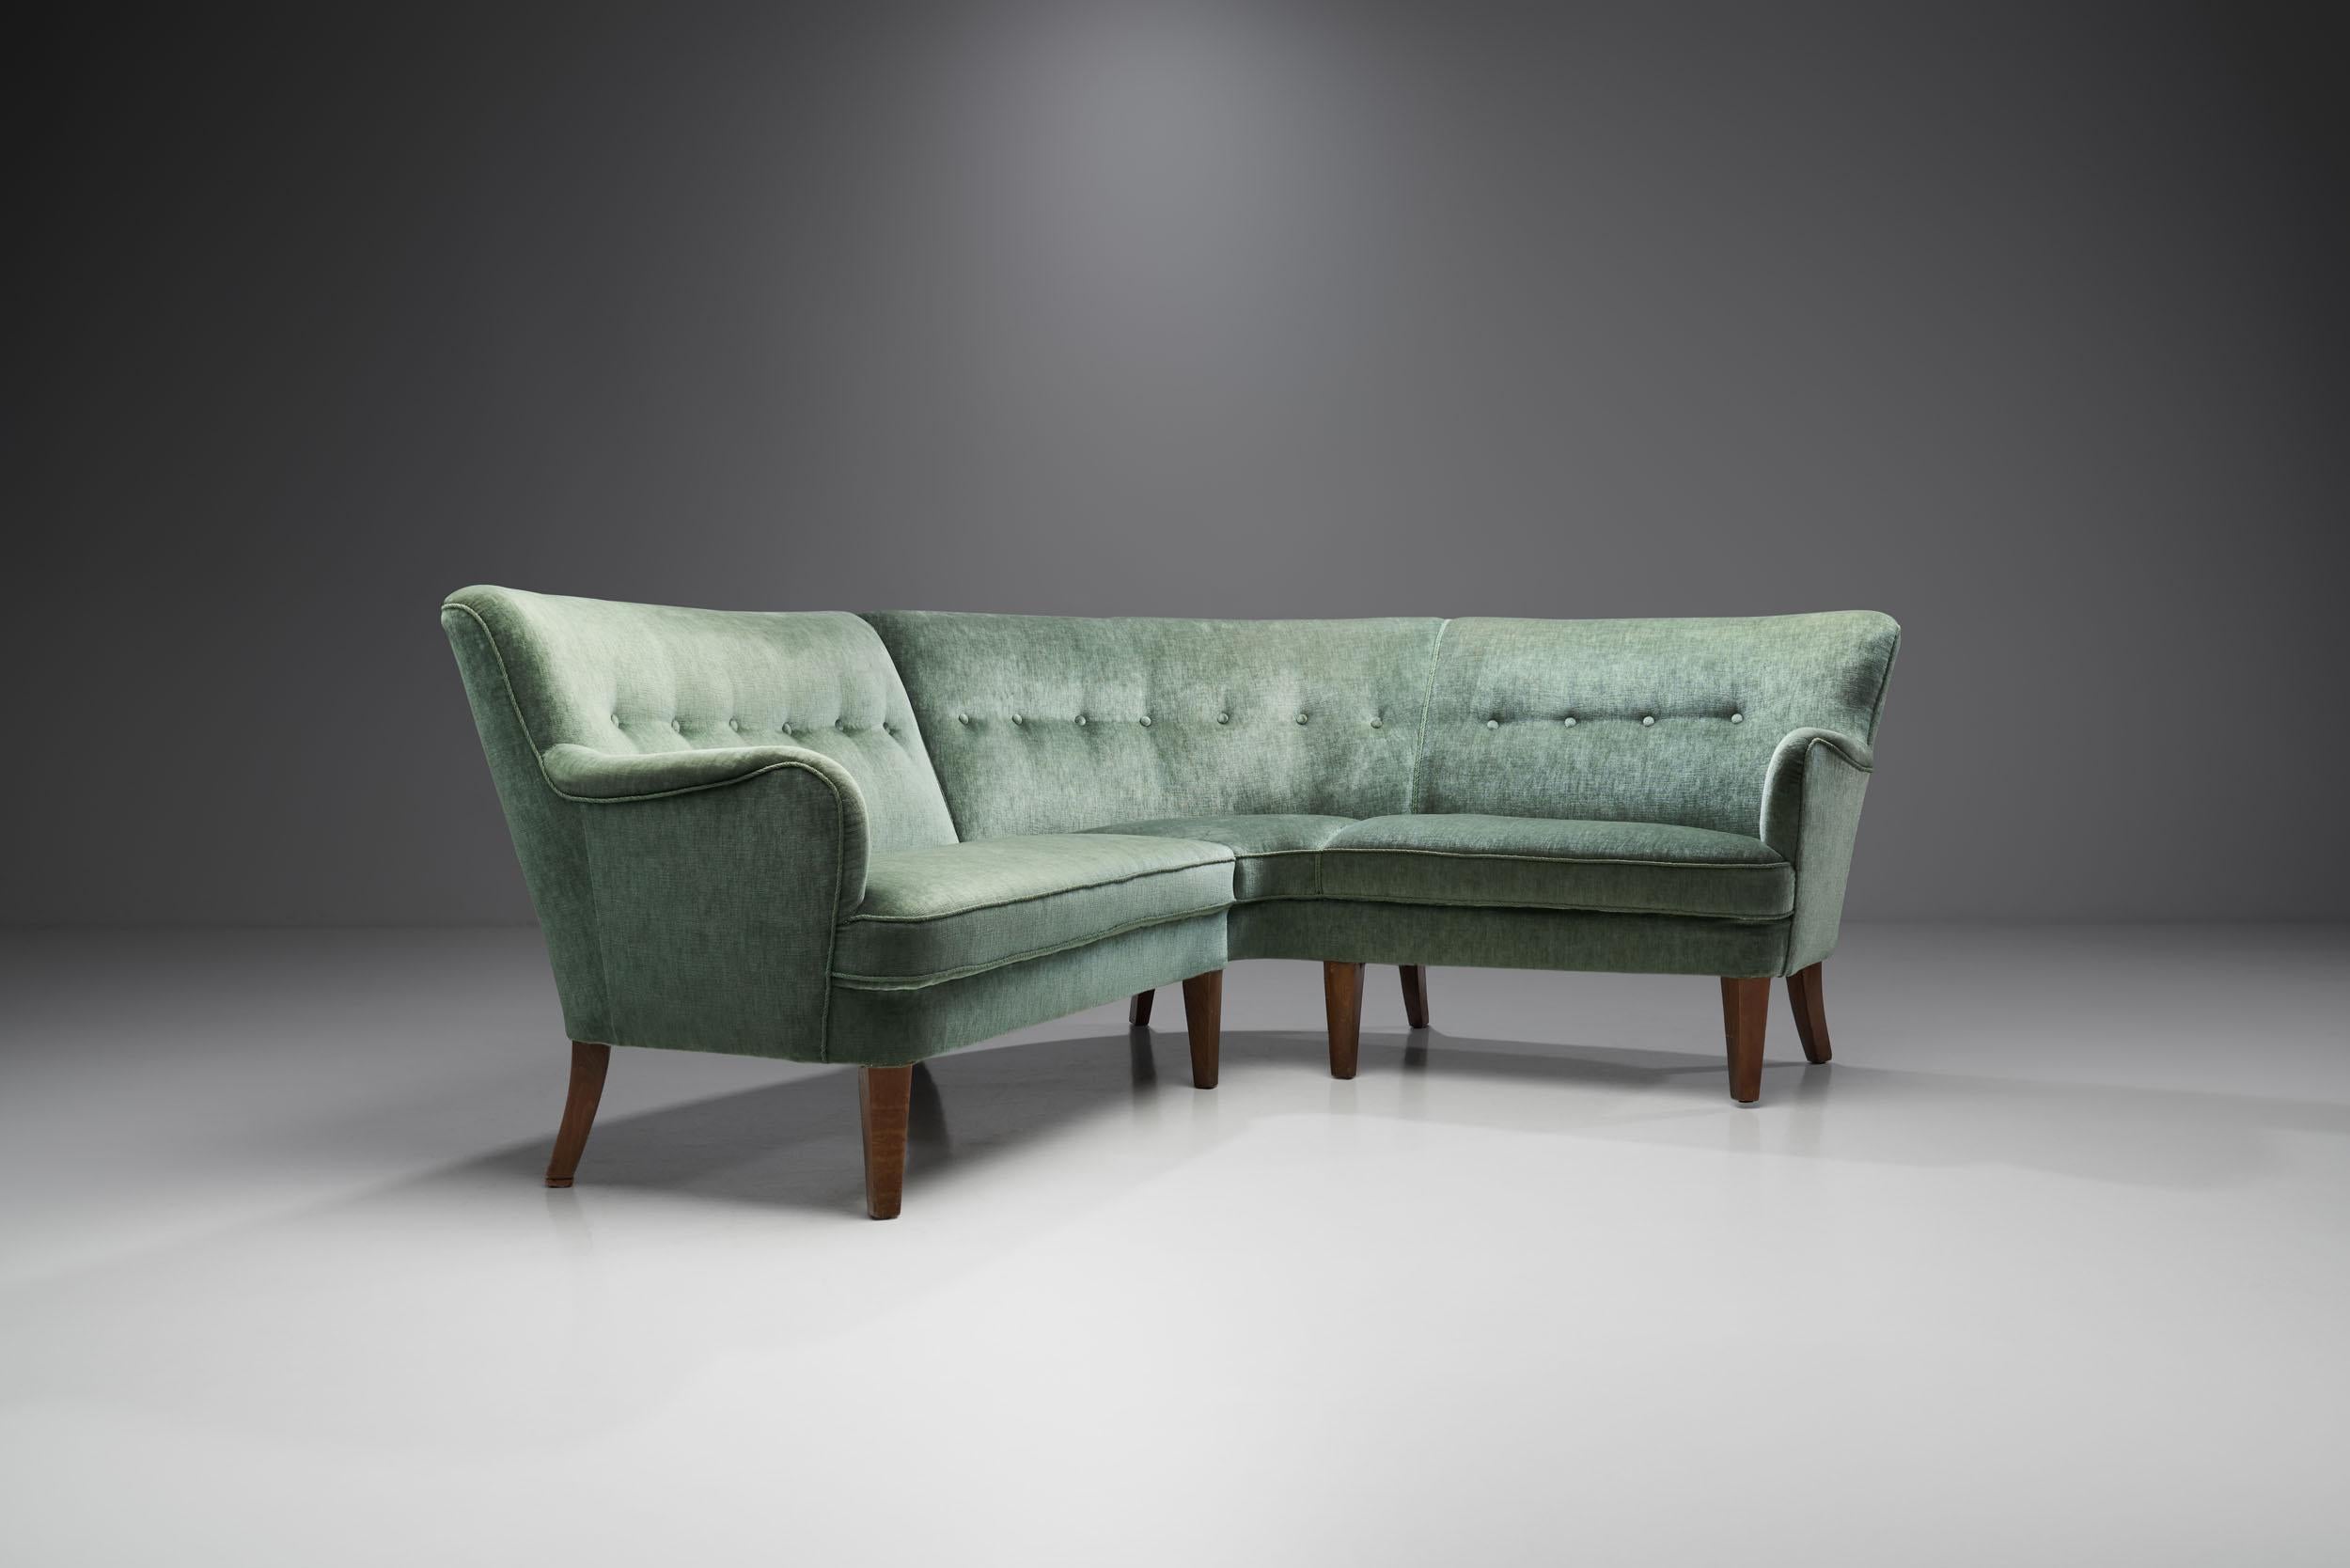 Orla Mølgaard-Nielsen's significant work has been mainly carried out together with his partner, Peter Hvidt, but the designer’s earlier models -like this sofa- are widely renowned for their understated elegance and quality.

This rare sofa was